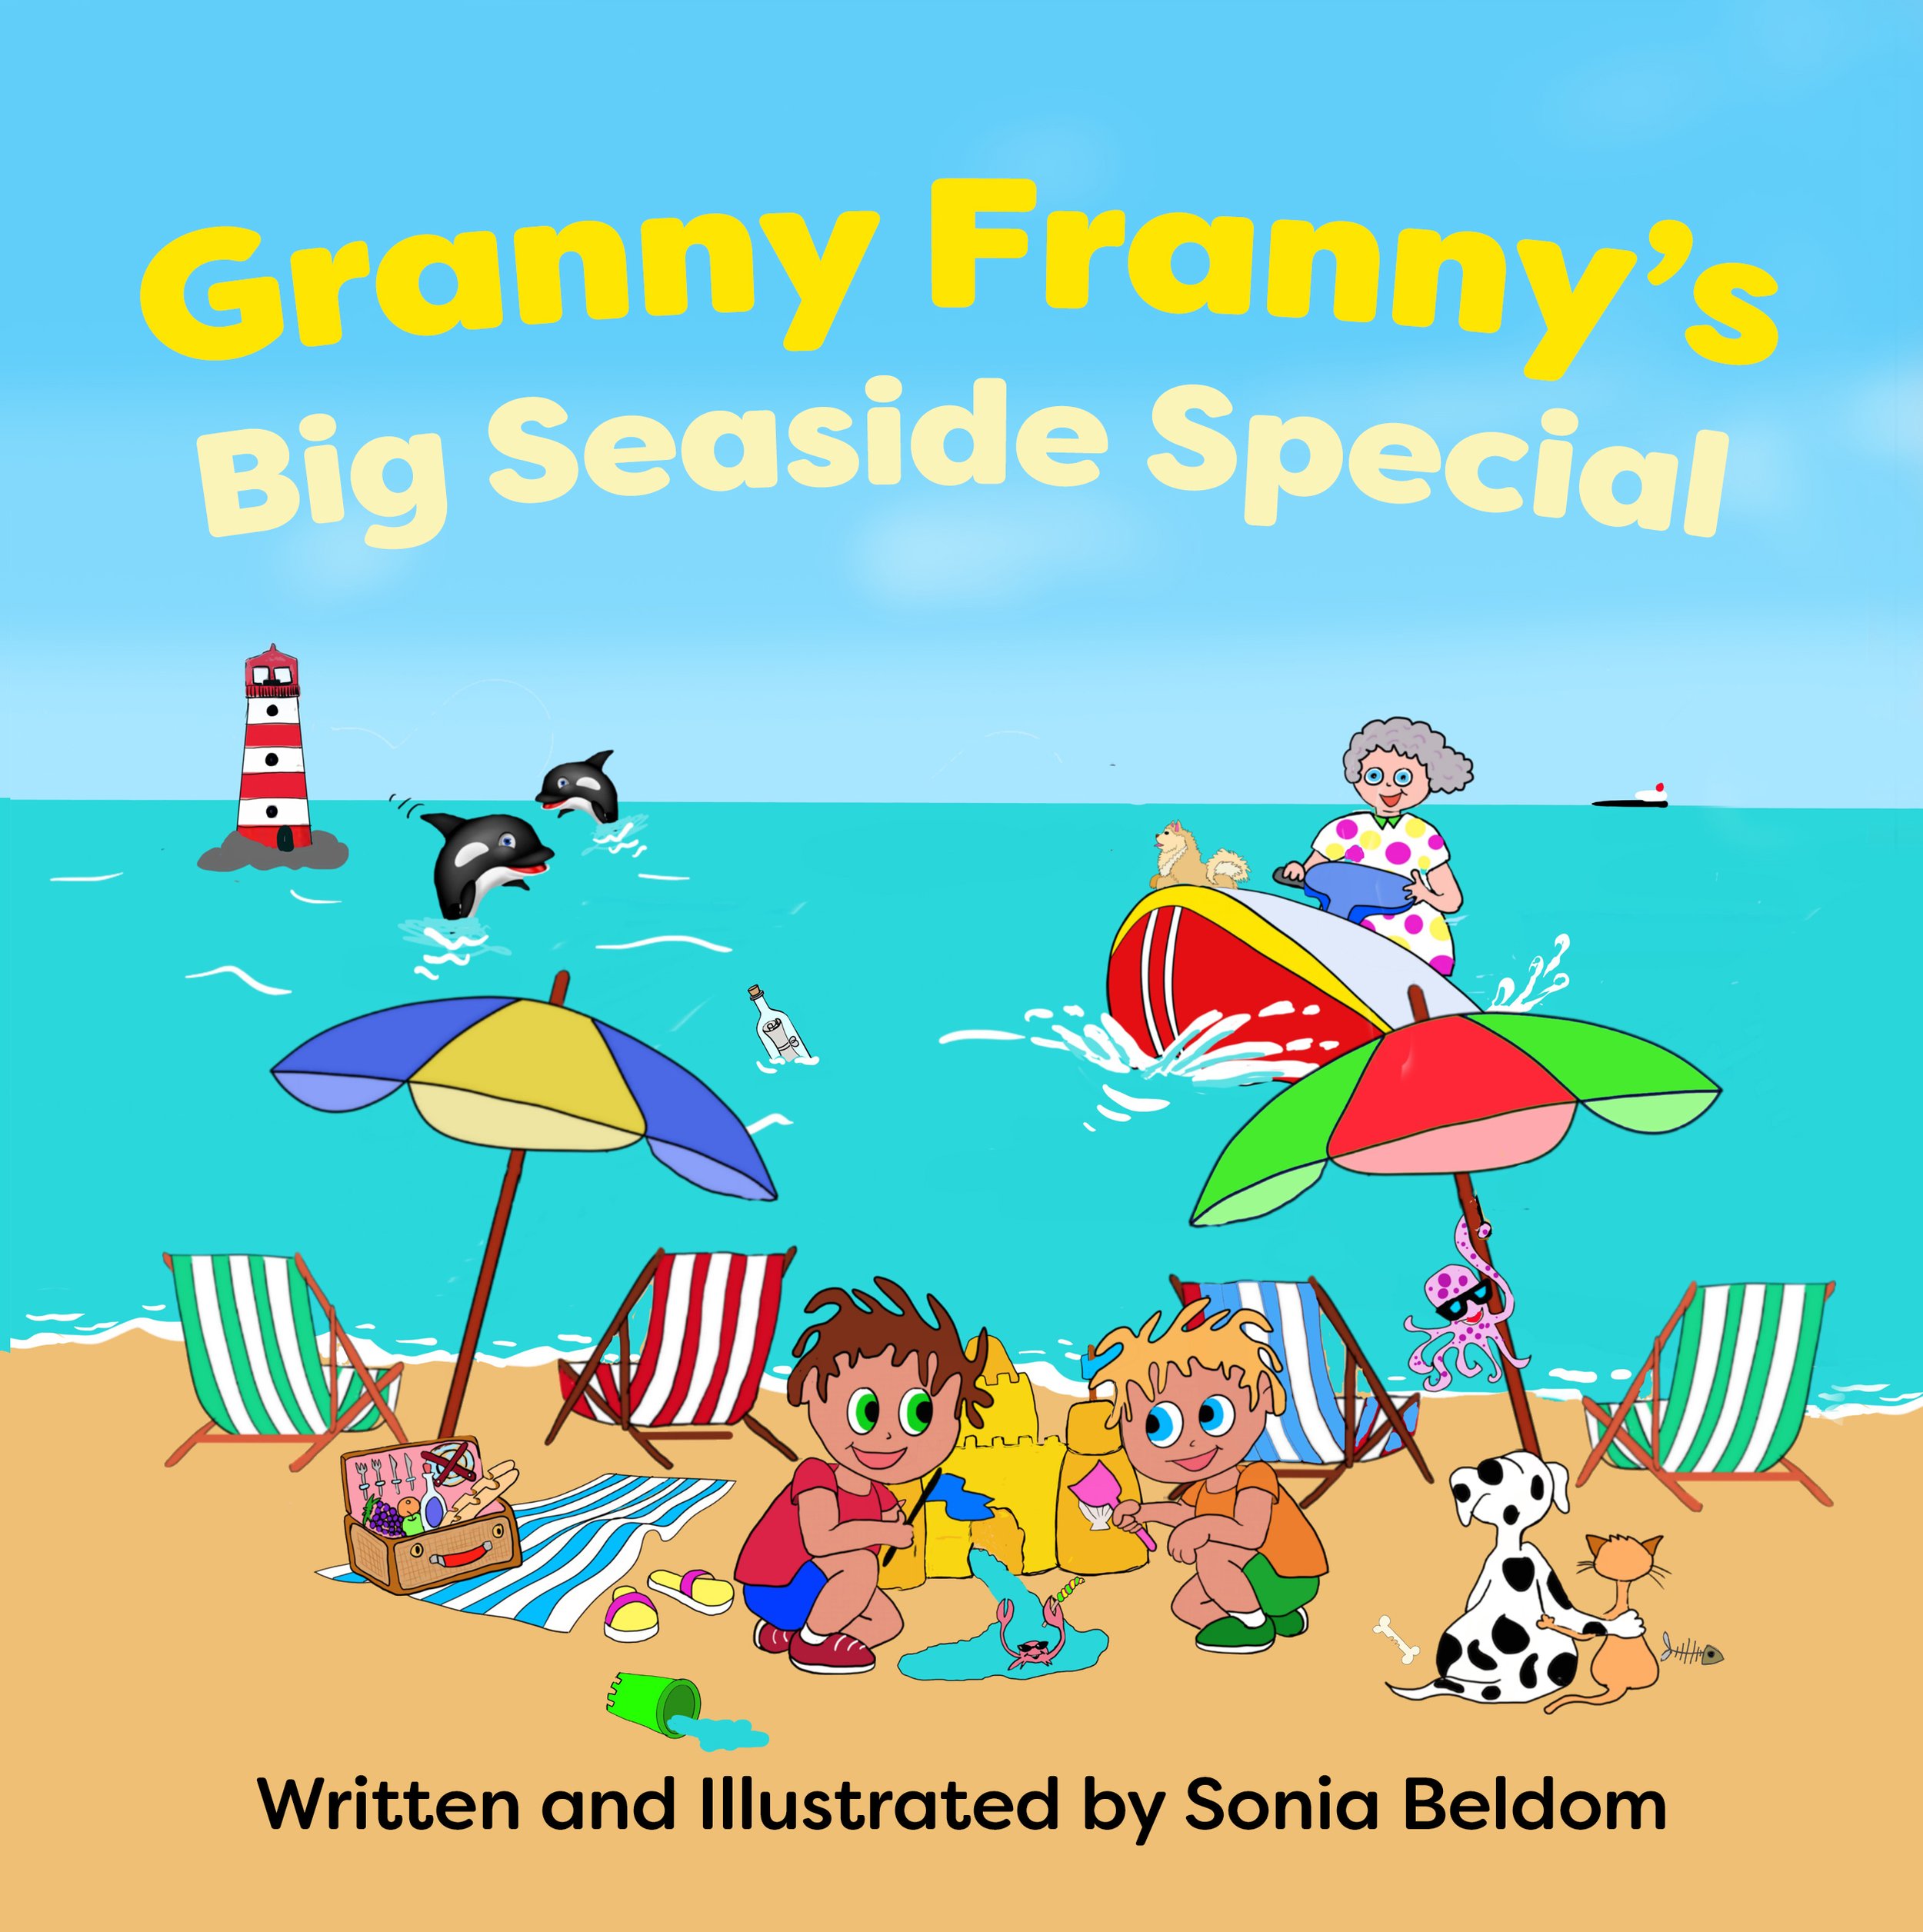 Big Seaside Special Front Cover.jpg